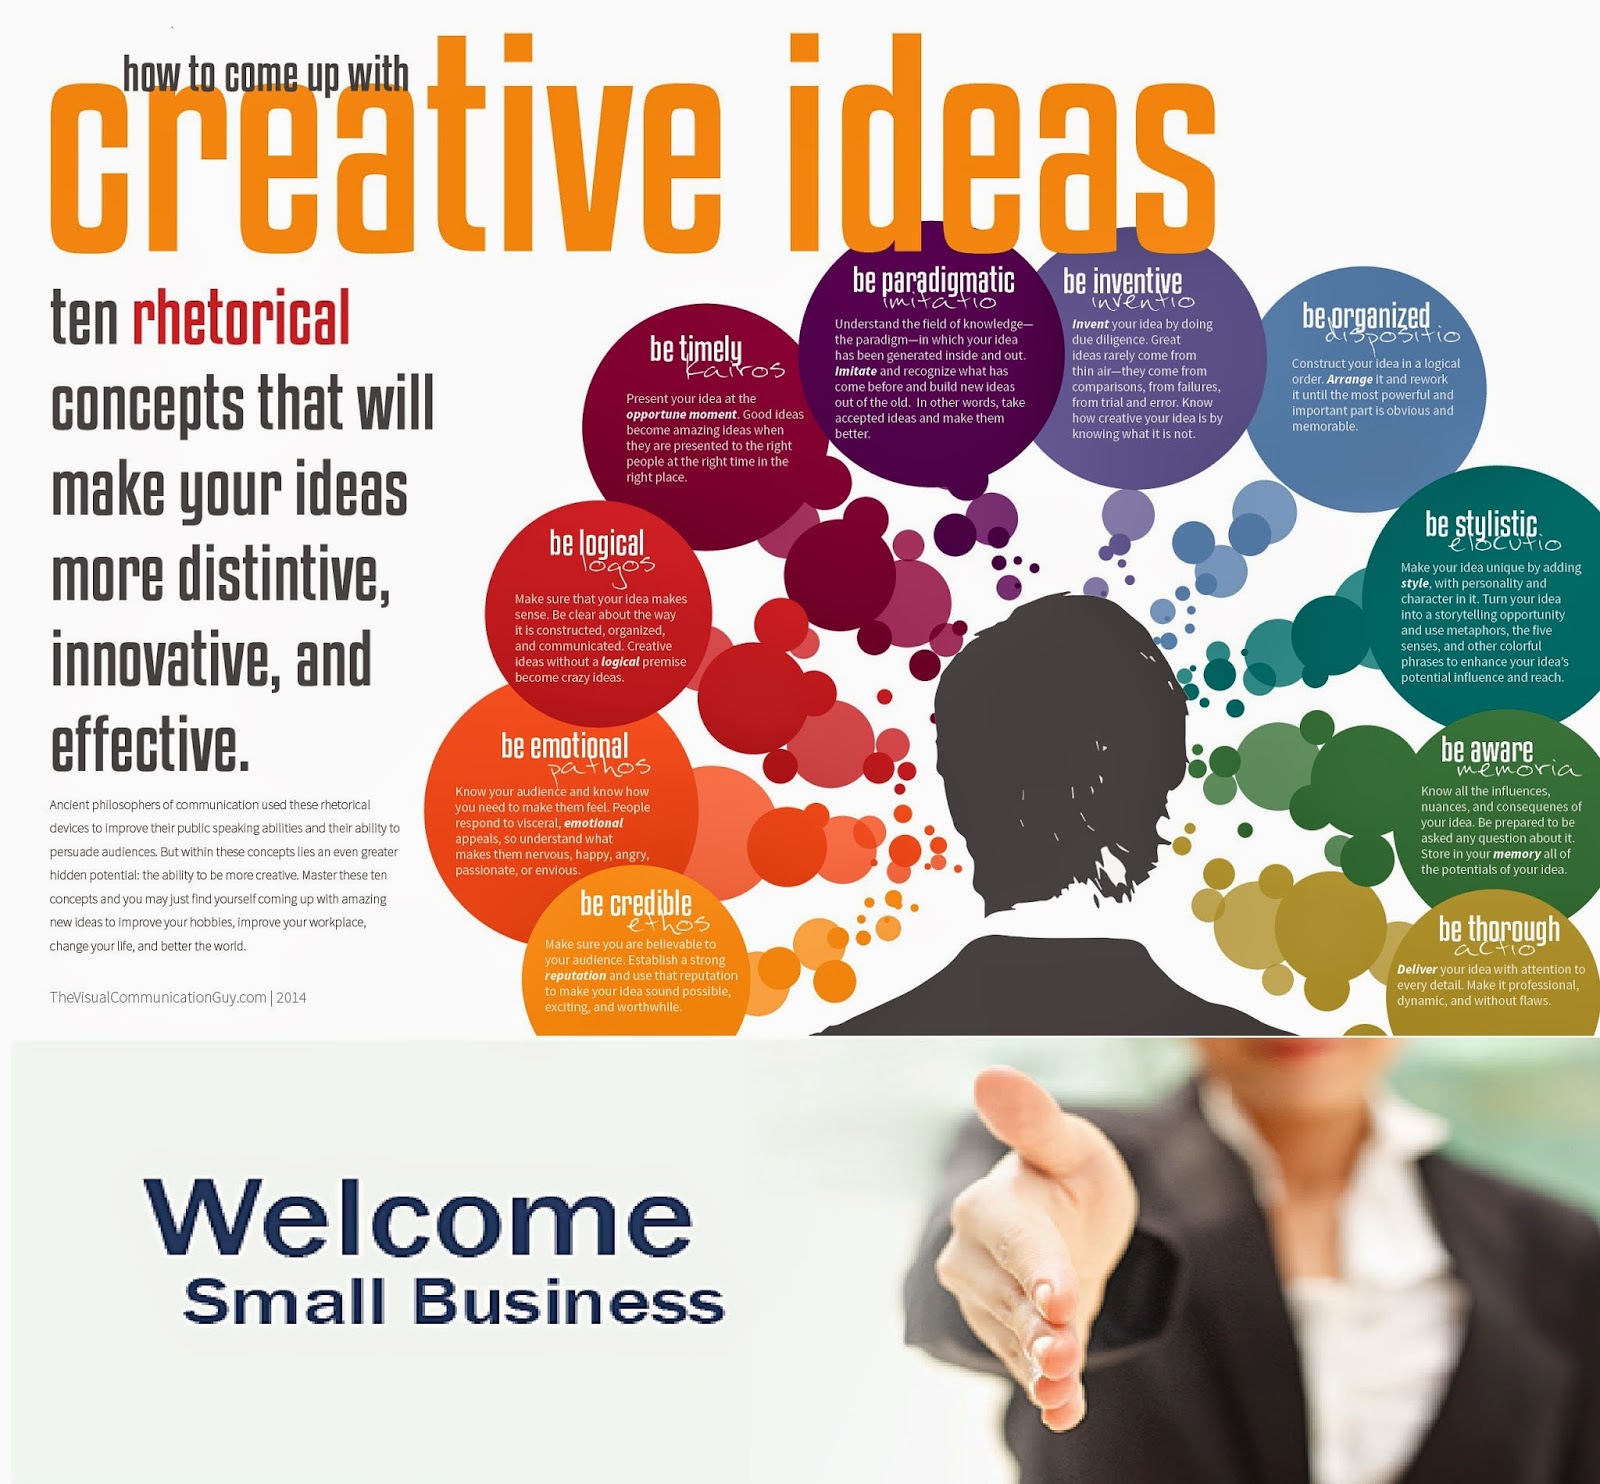 Simple Creative Ideas And Strategies For Starting Small Business